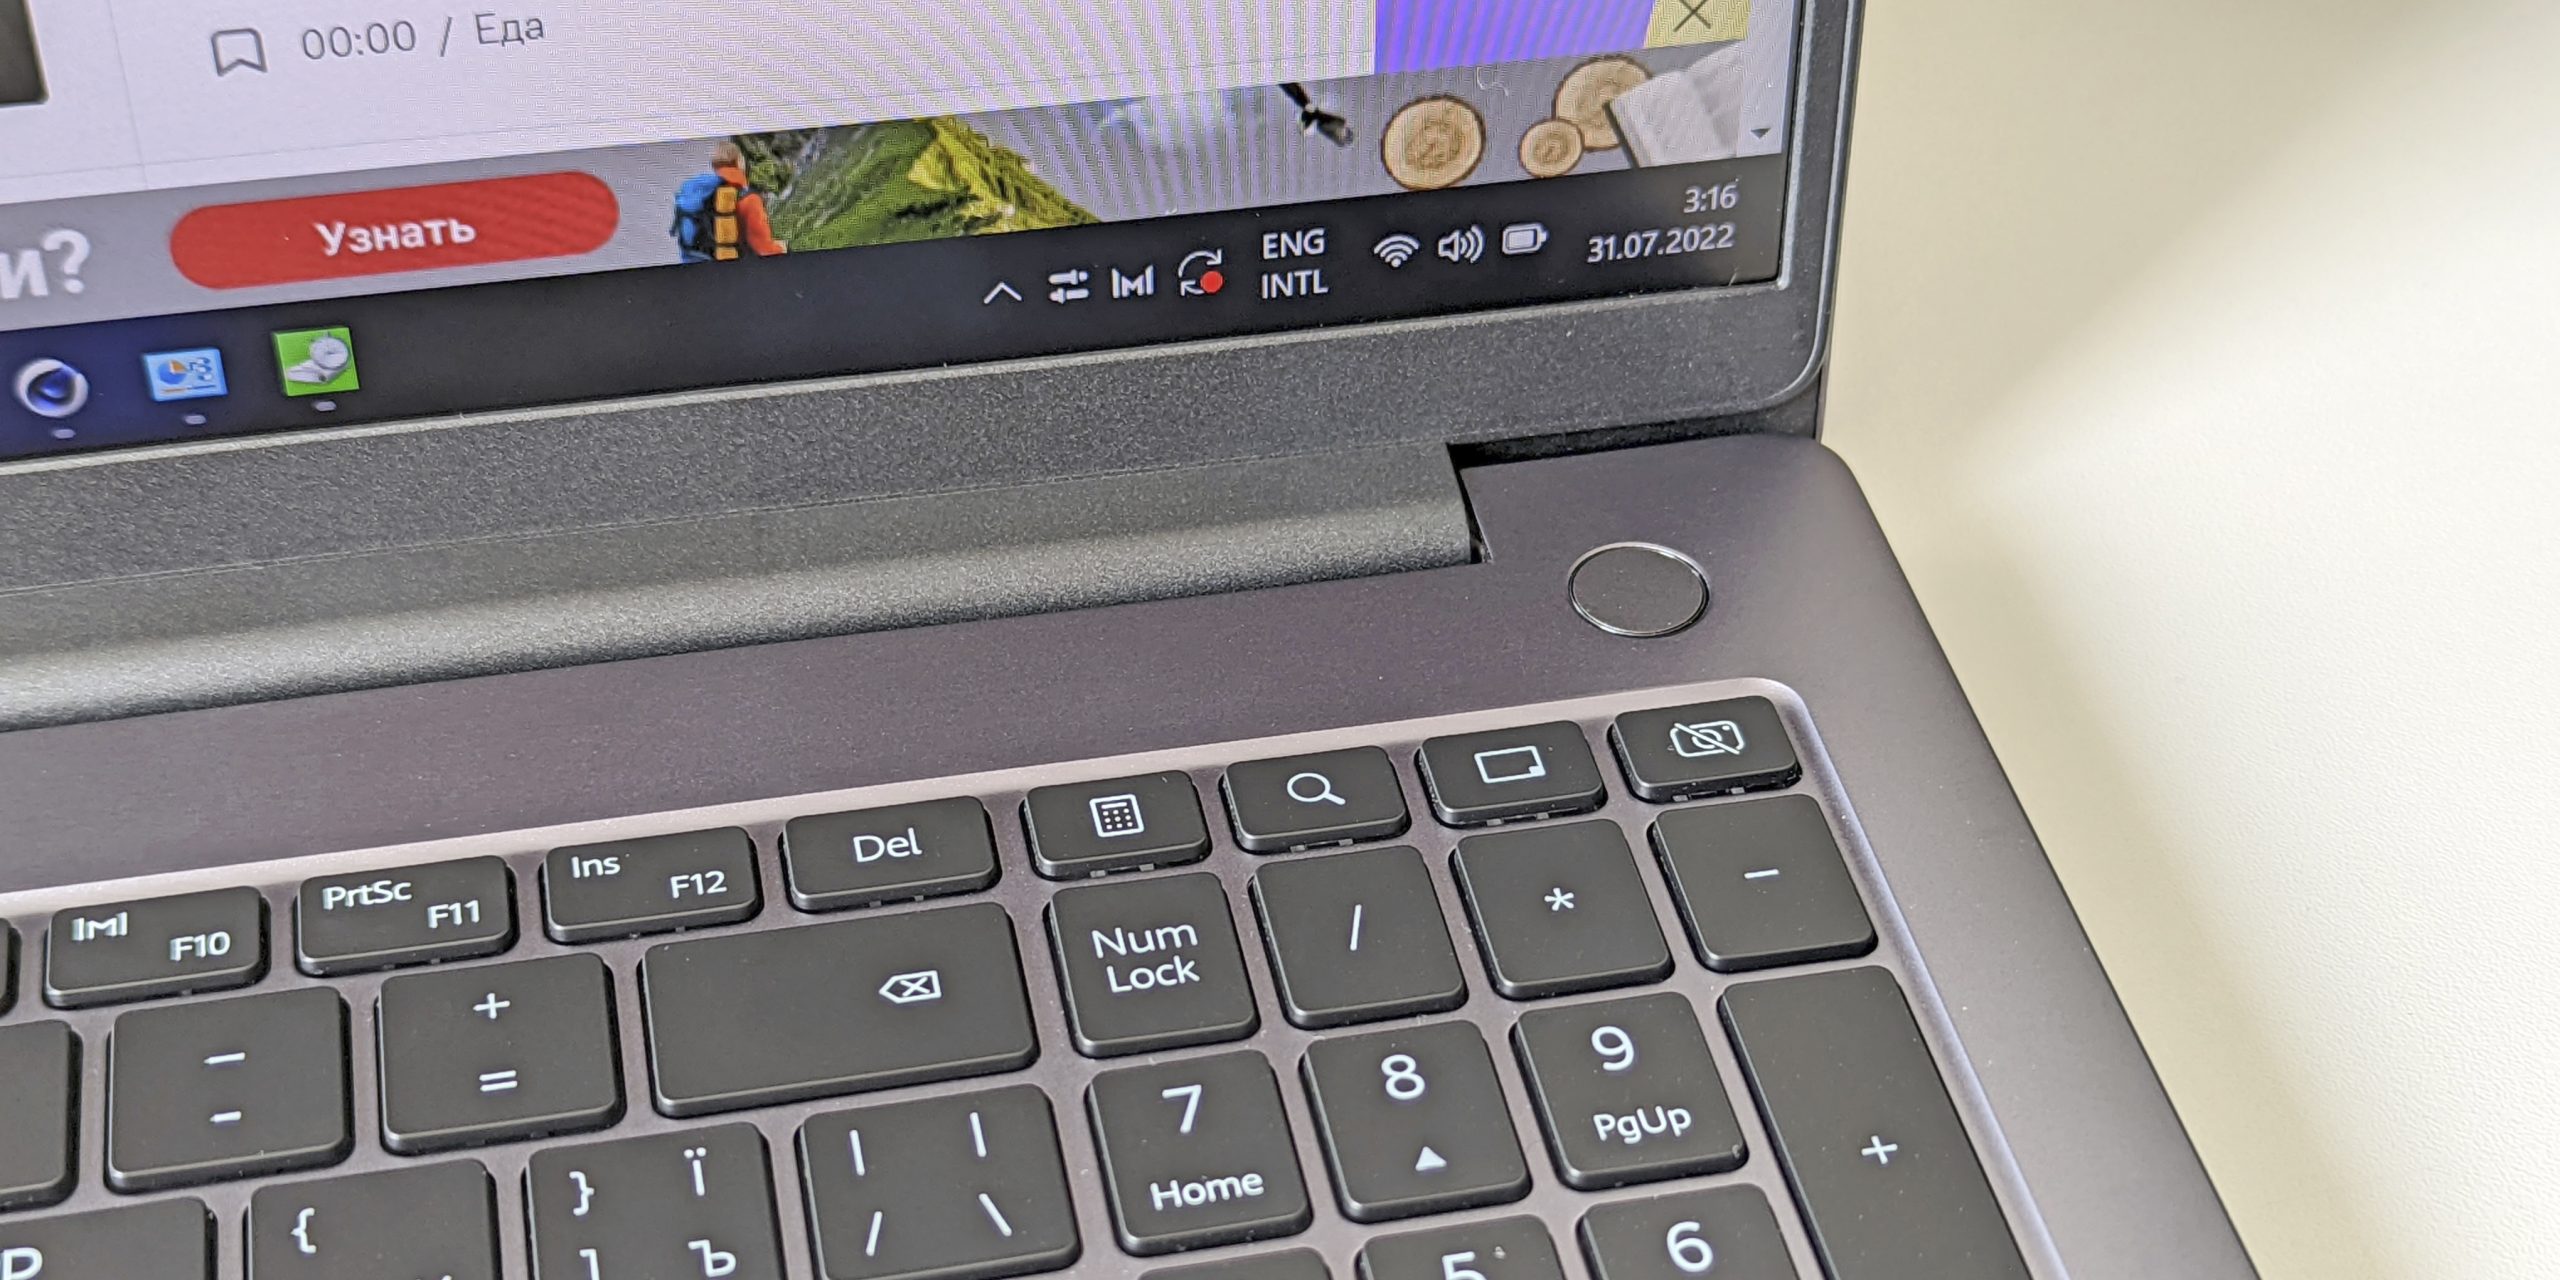 Huawei MateBook D16 2022: function keys above the number pad